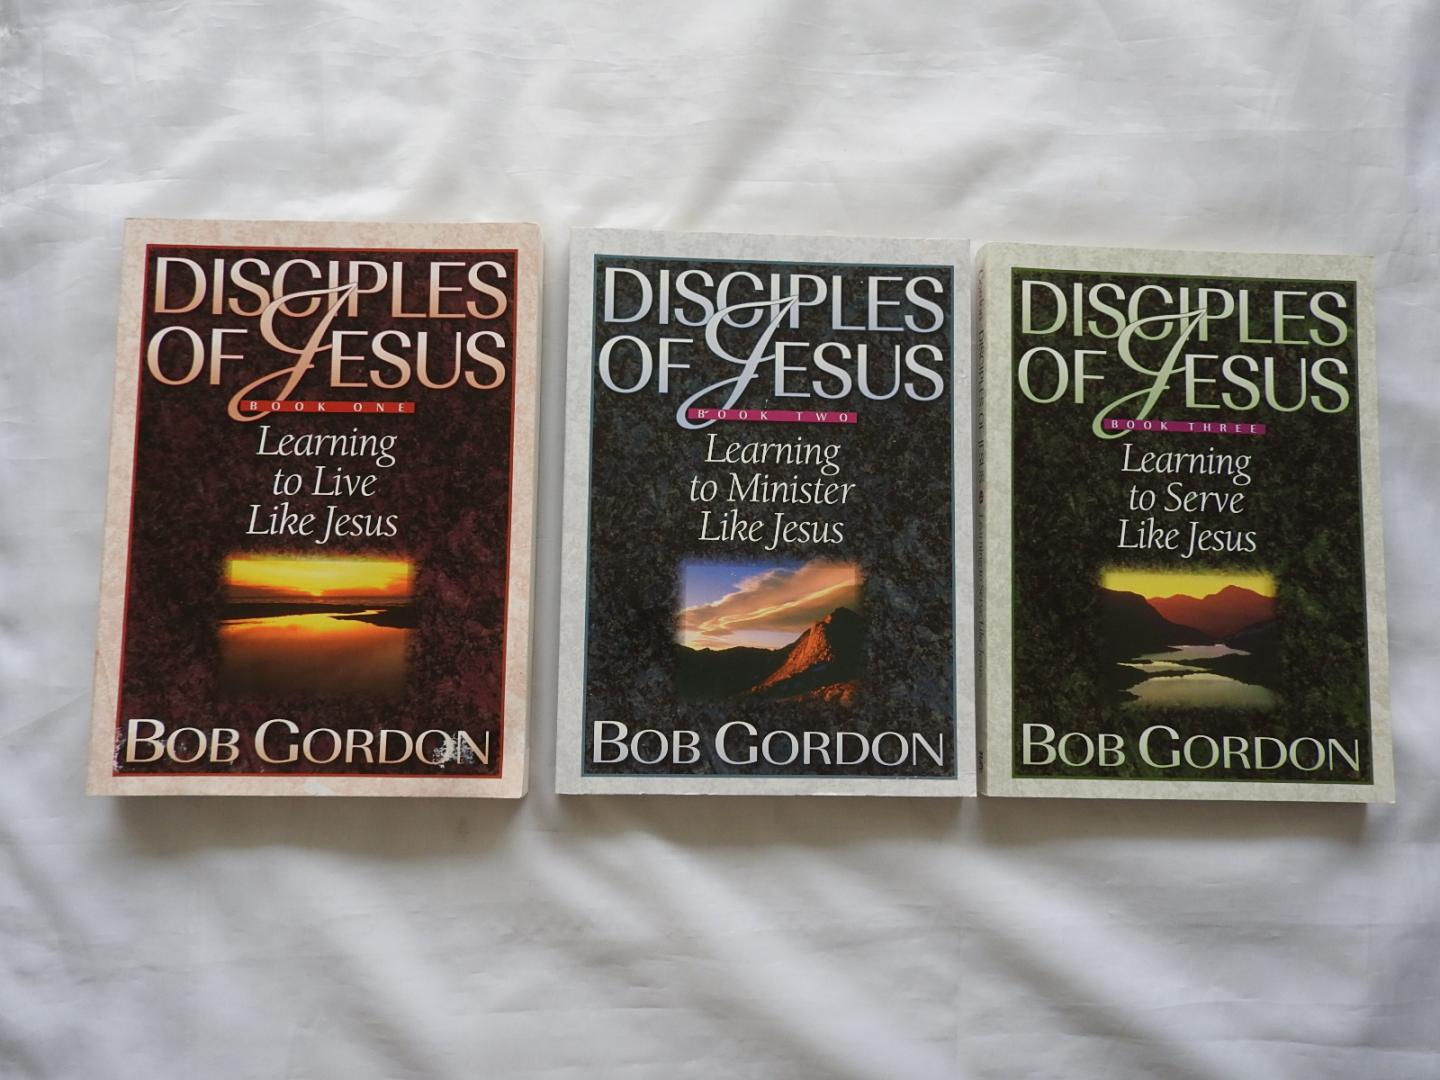 Bob Gordon - Disciples of Jesus: Learning to LIVE - MINISTER - SERVE - like Jesus . Book one 1  - two 2 - three 3. - COMPLETE SET - INCLUDING ALSO THE  group leaders manual for disciples of Jesus